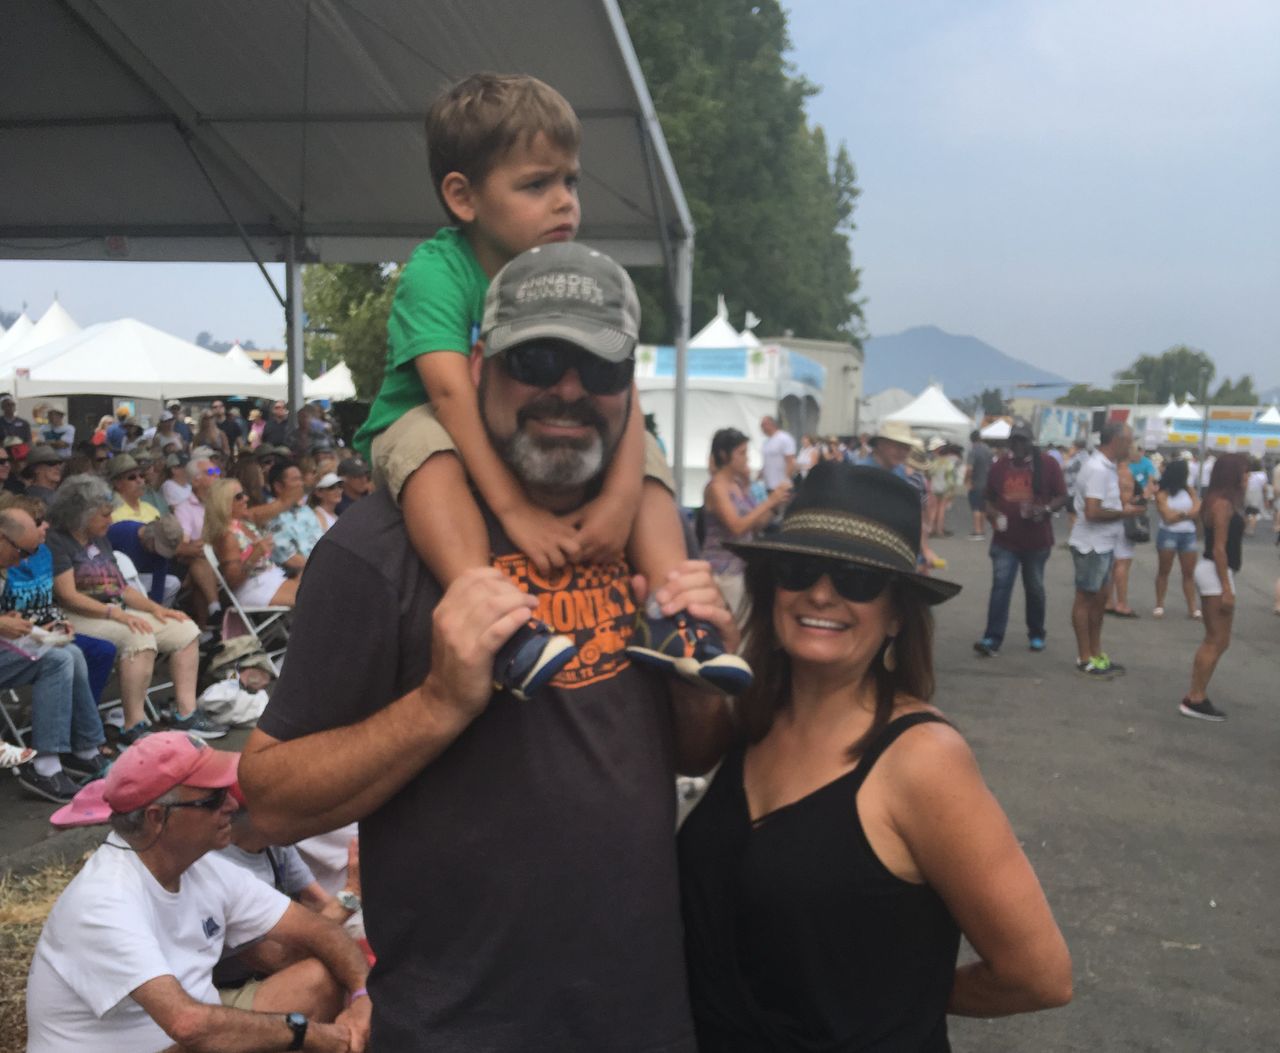 Steve, Michele and Desmond Rahmn at the Sausalito art festival in September 2017, one month before the fire